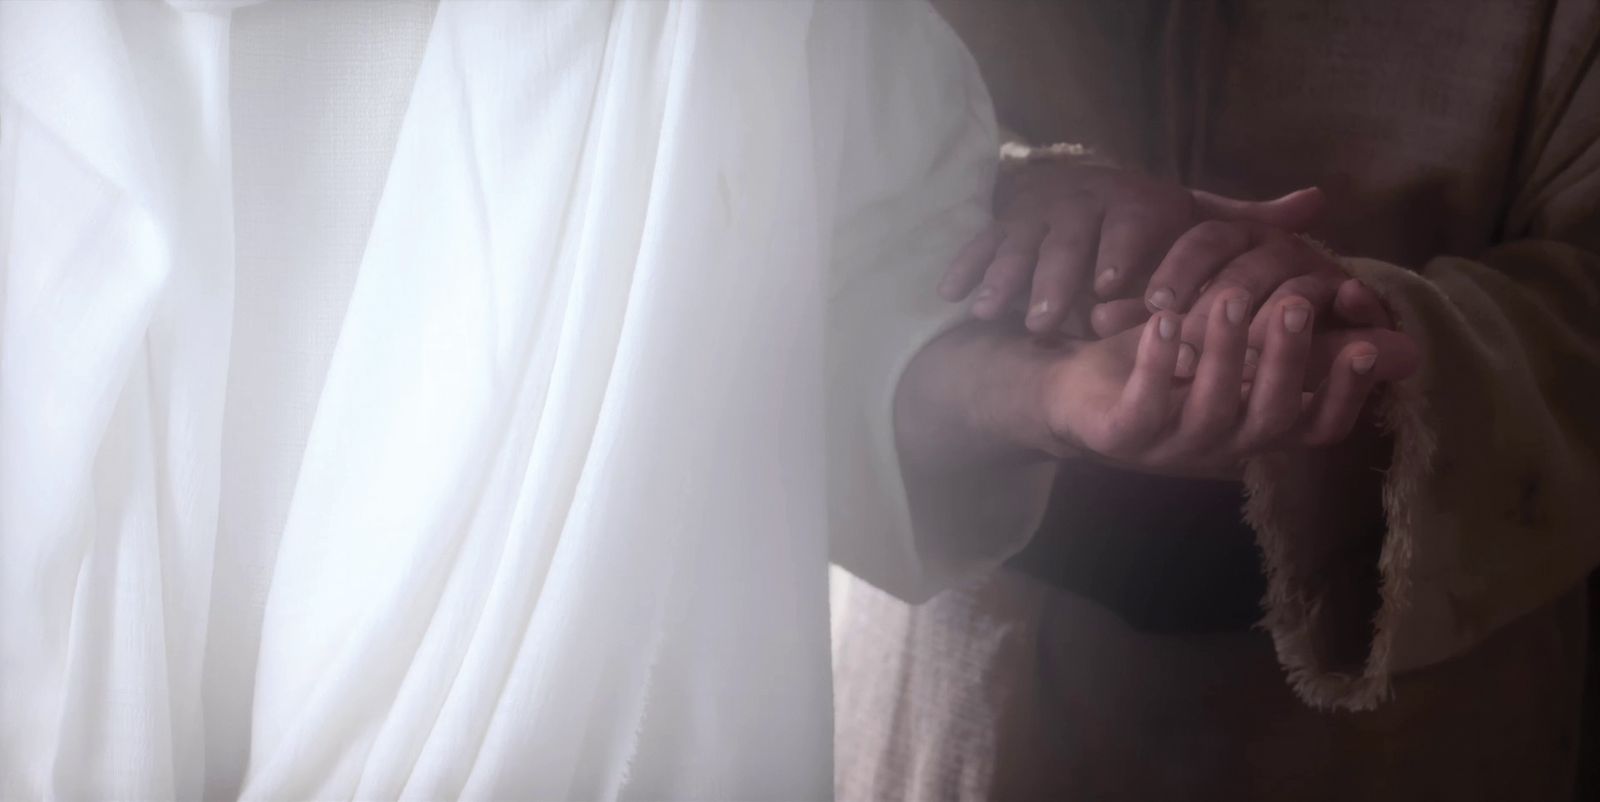 Christ invites people to touch His hands.